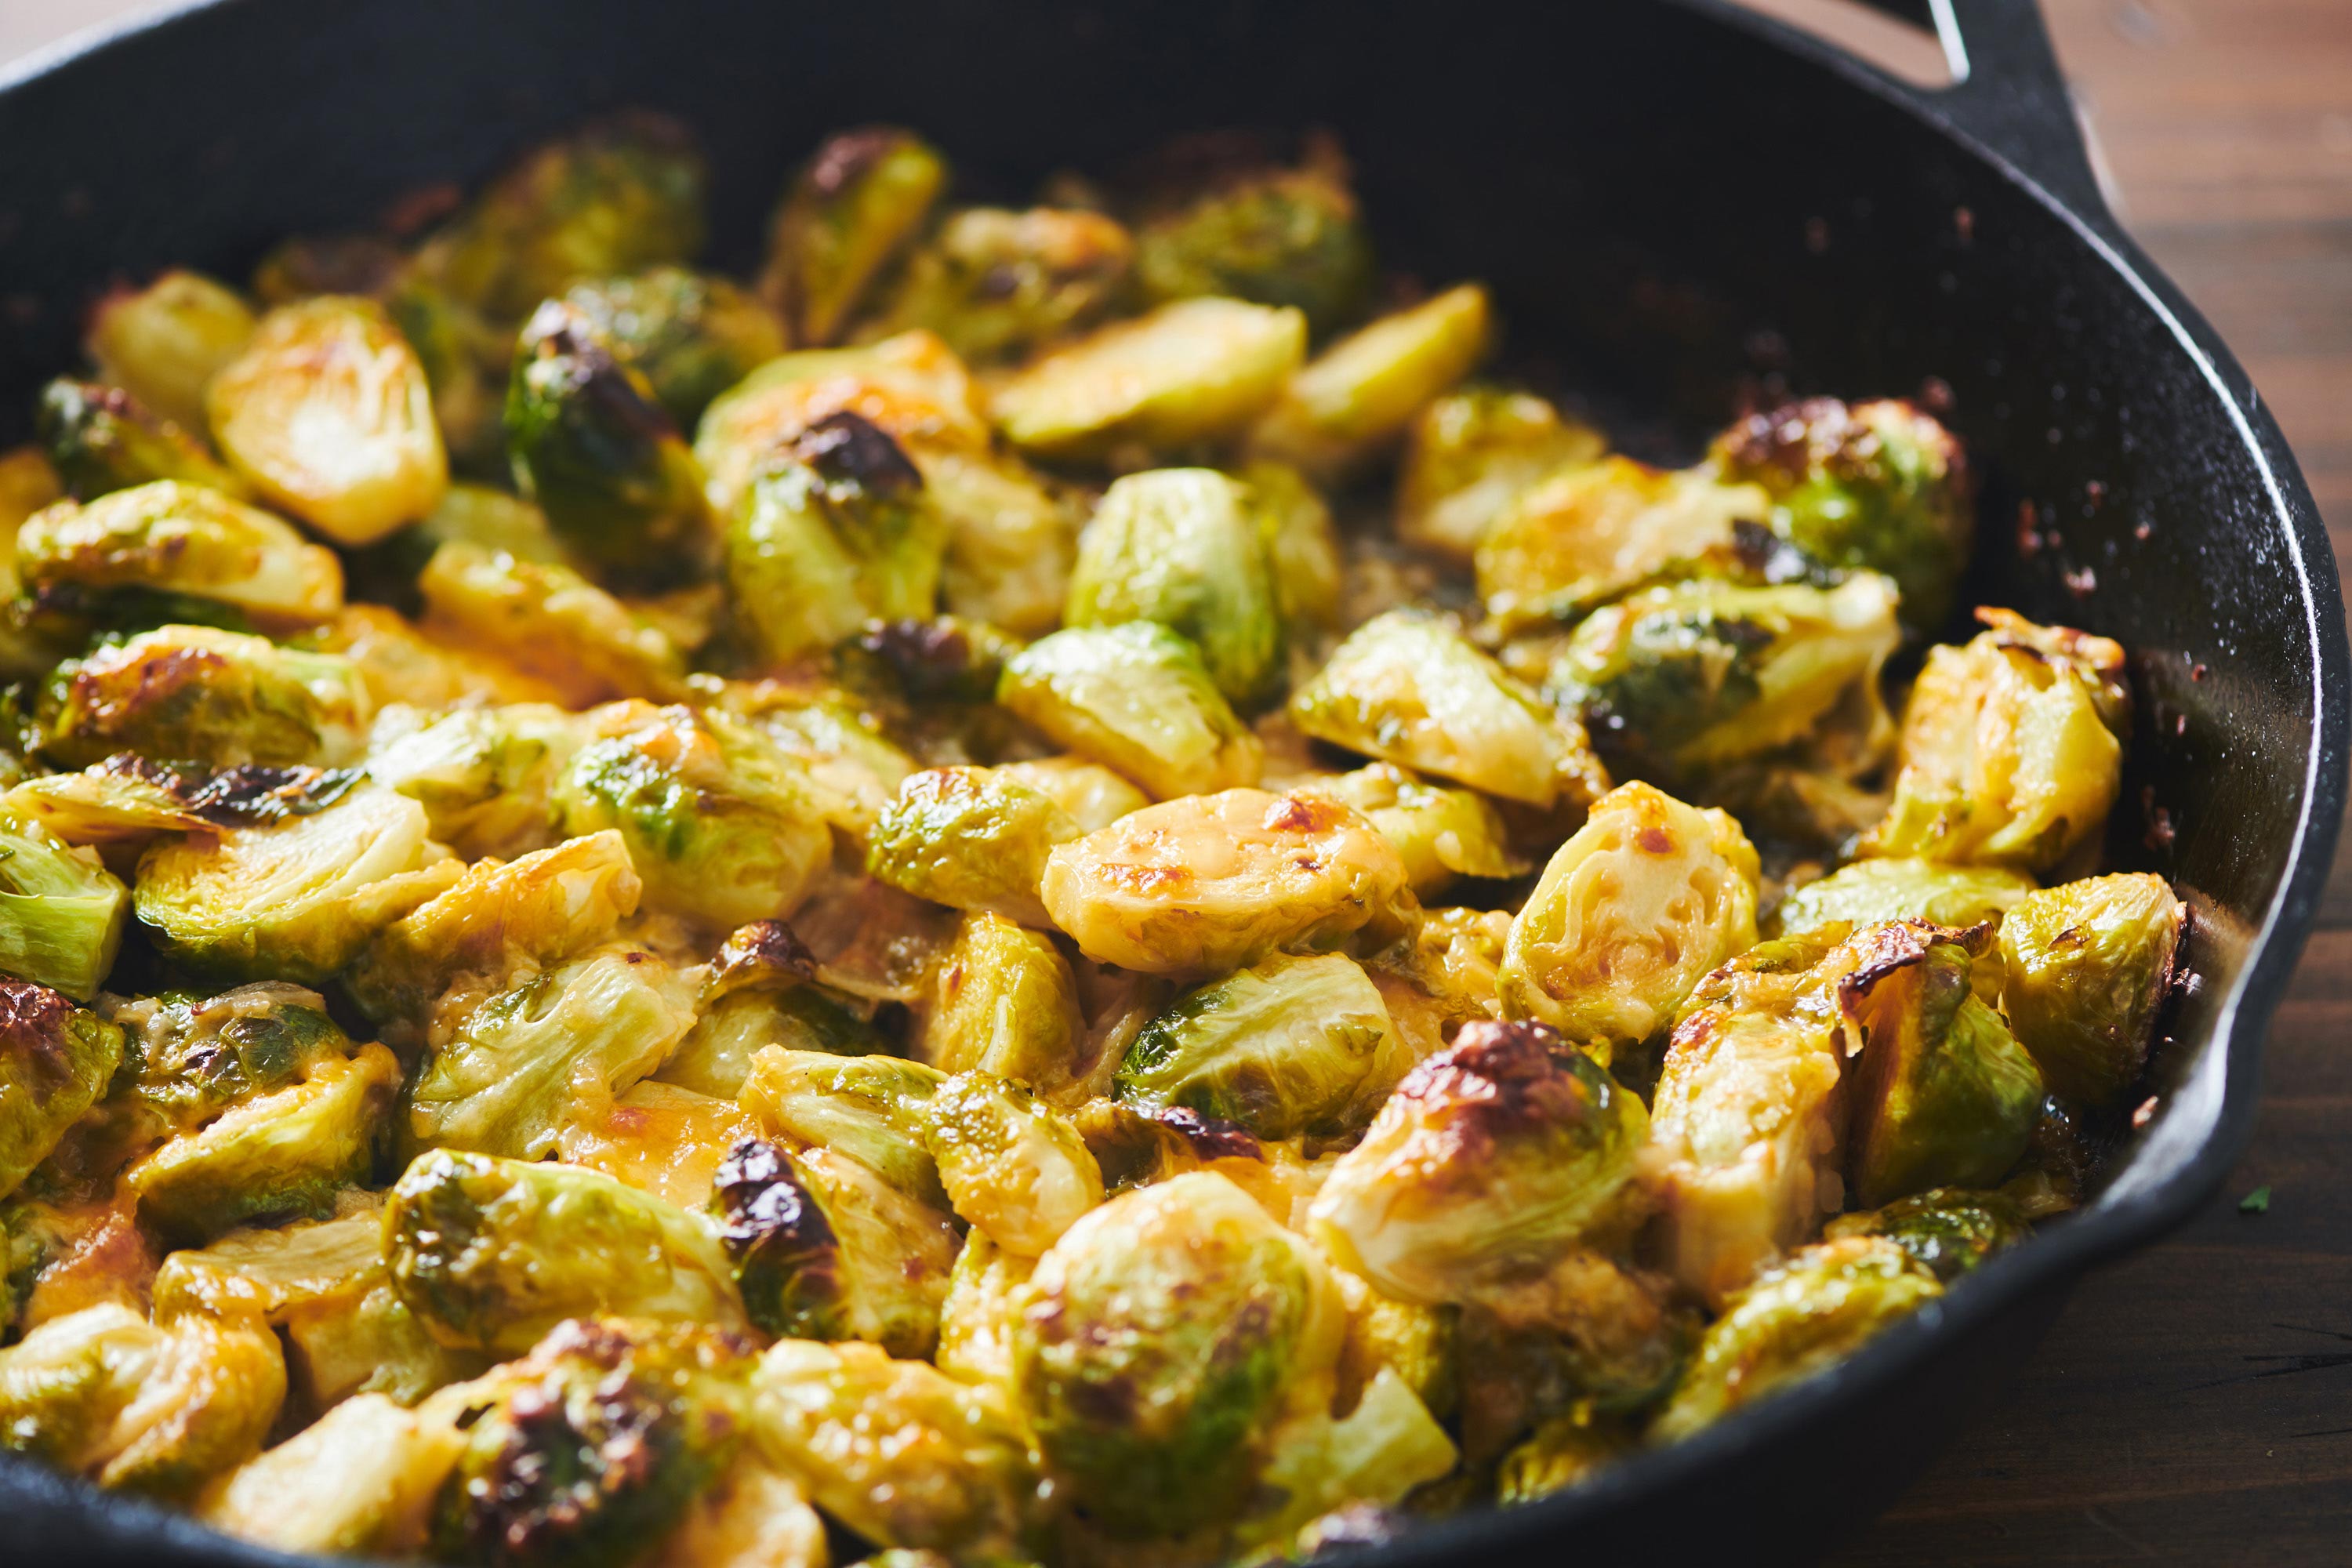 https://themom100.com/wp-content/uploads/2019/04/cheesy-baked-brussels-sprouts-091.jpg